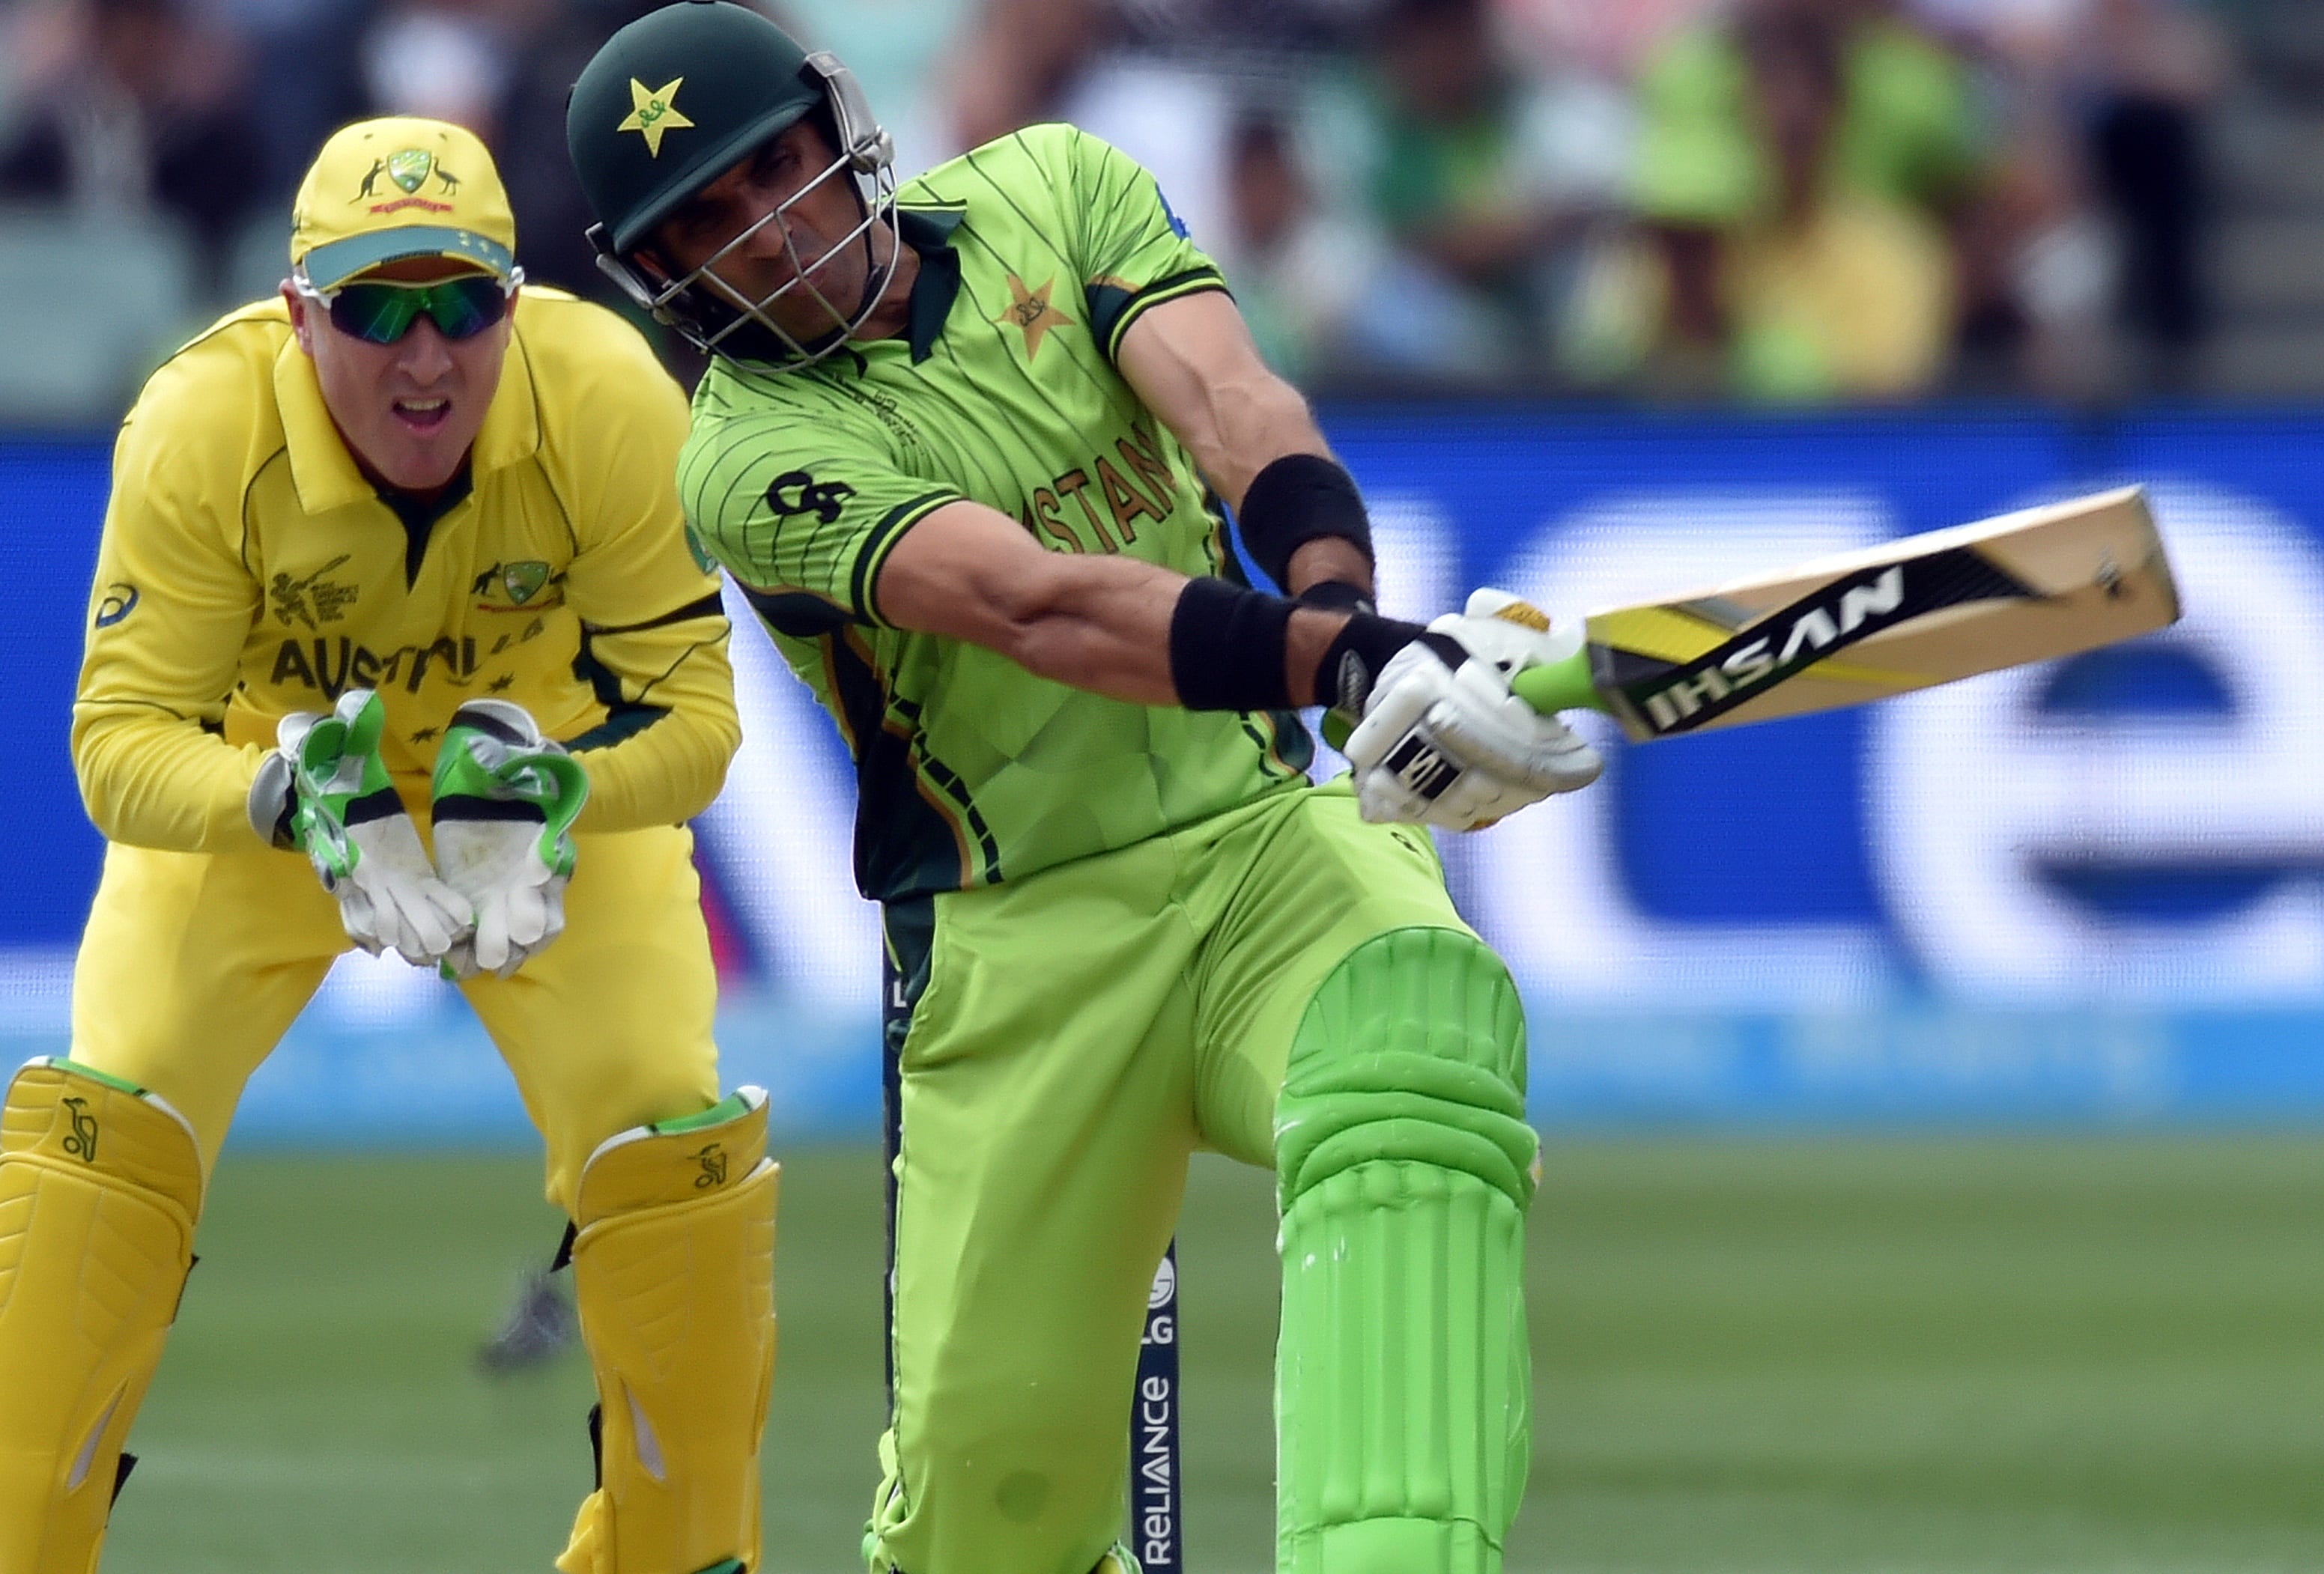 Pakistan's Misbah-ul-Haq plays a shot during the 2015 Cricket World Cup quarter-final match between Pakistan and Australia at the Adelaide Oval on 20 March.